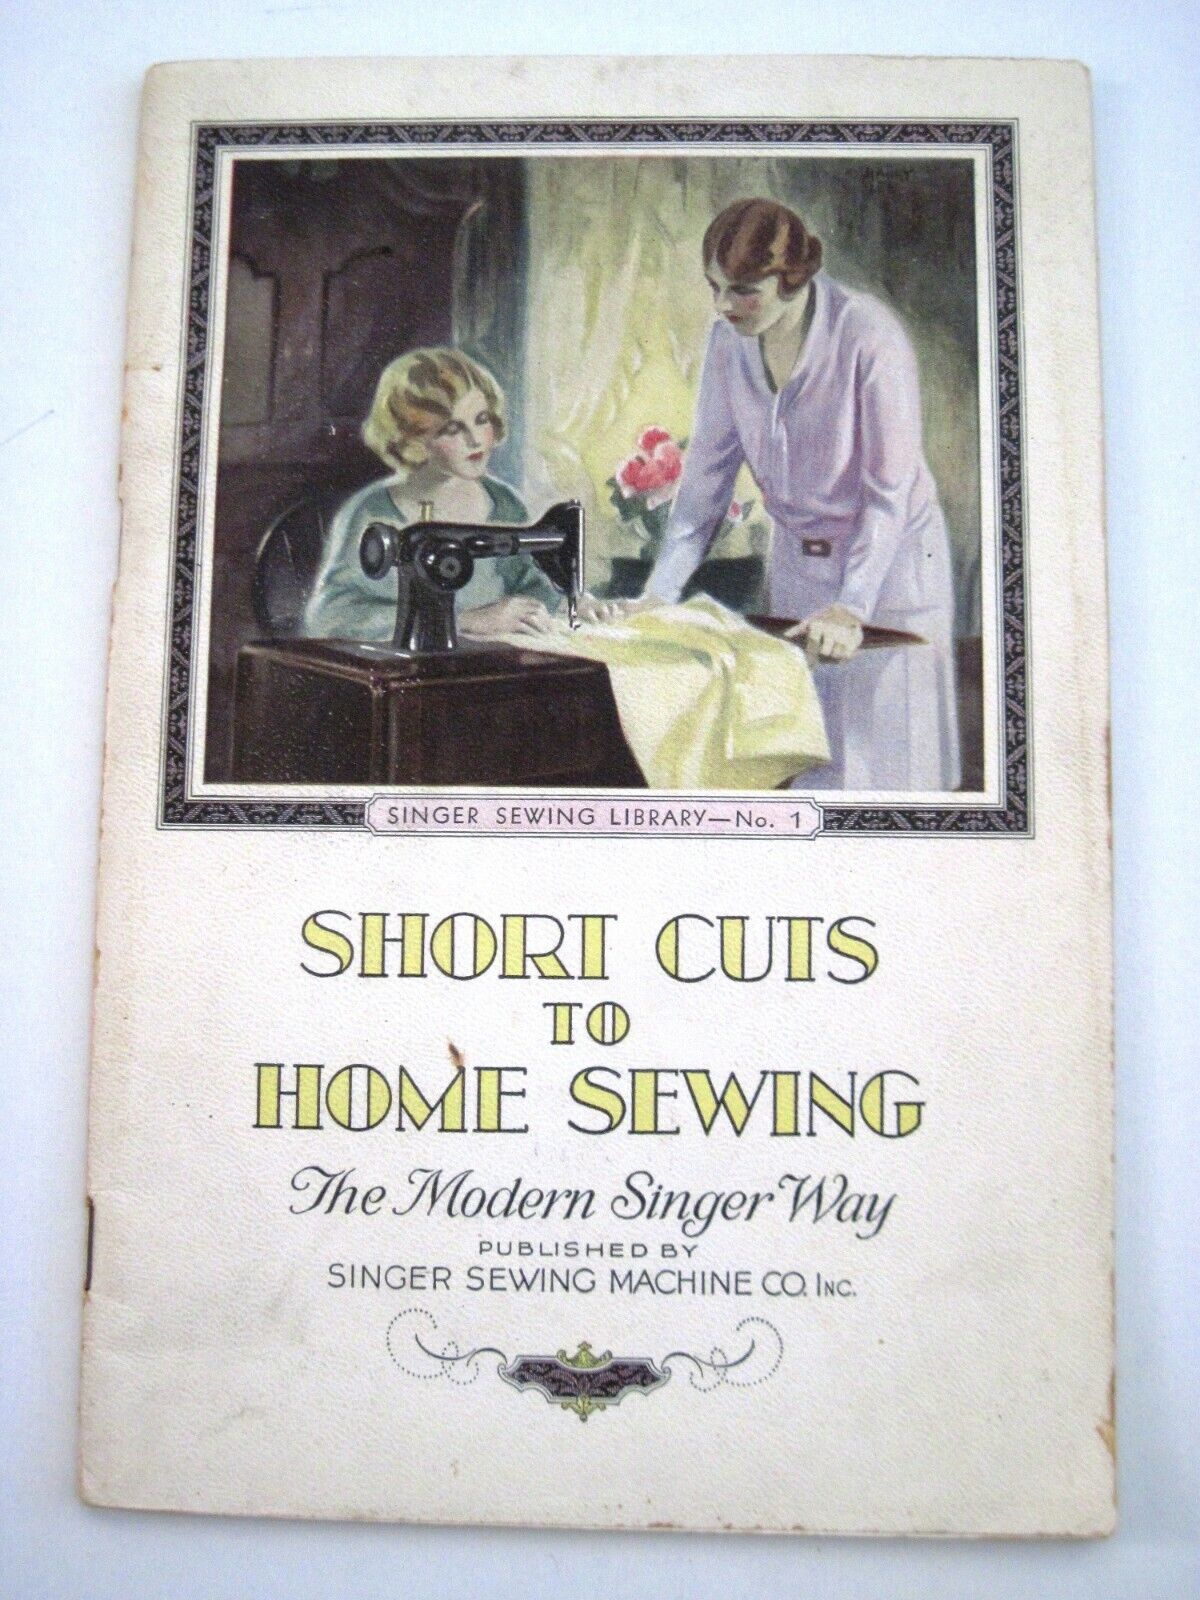 1930 Booklet "Short Cuts to Home Sewing" by "Singer Sewing Machine Co."   *